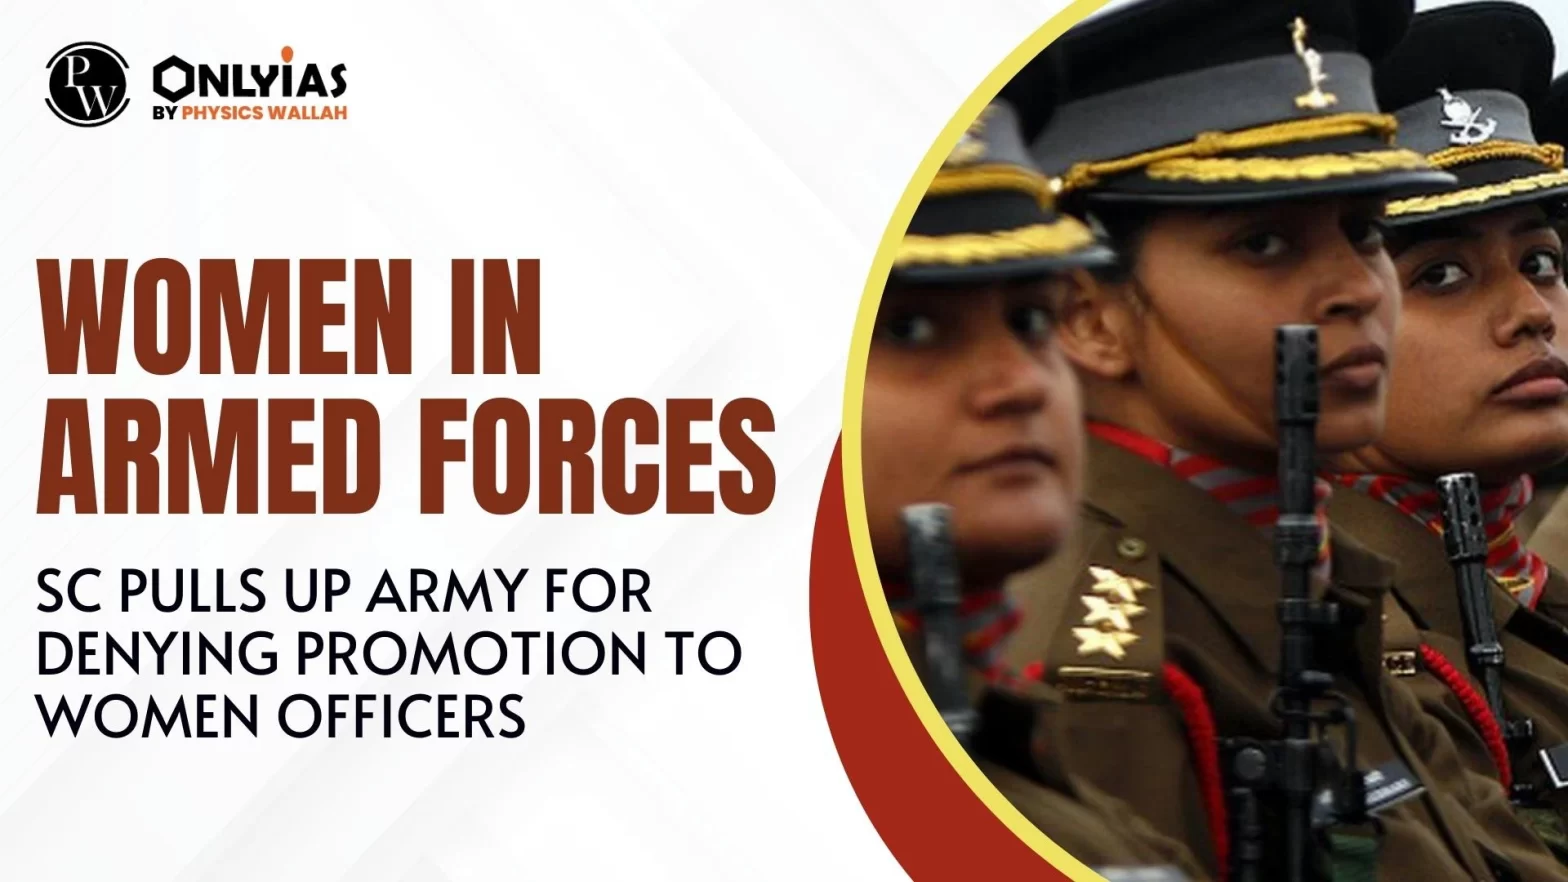 Women in Armed Forces – SC Pulls up Army for Denying Promotion to Women Officers